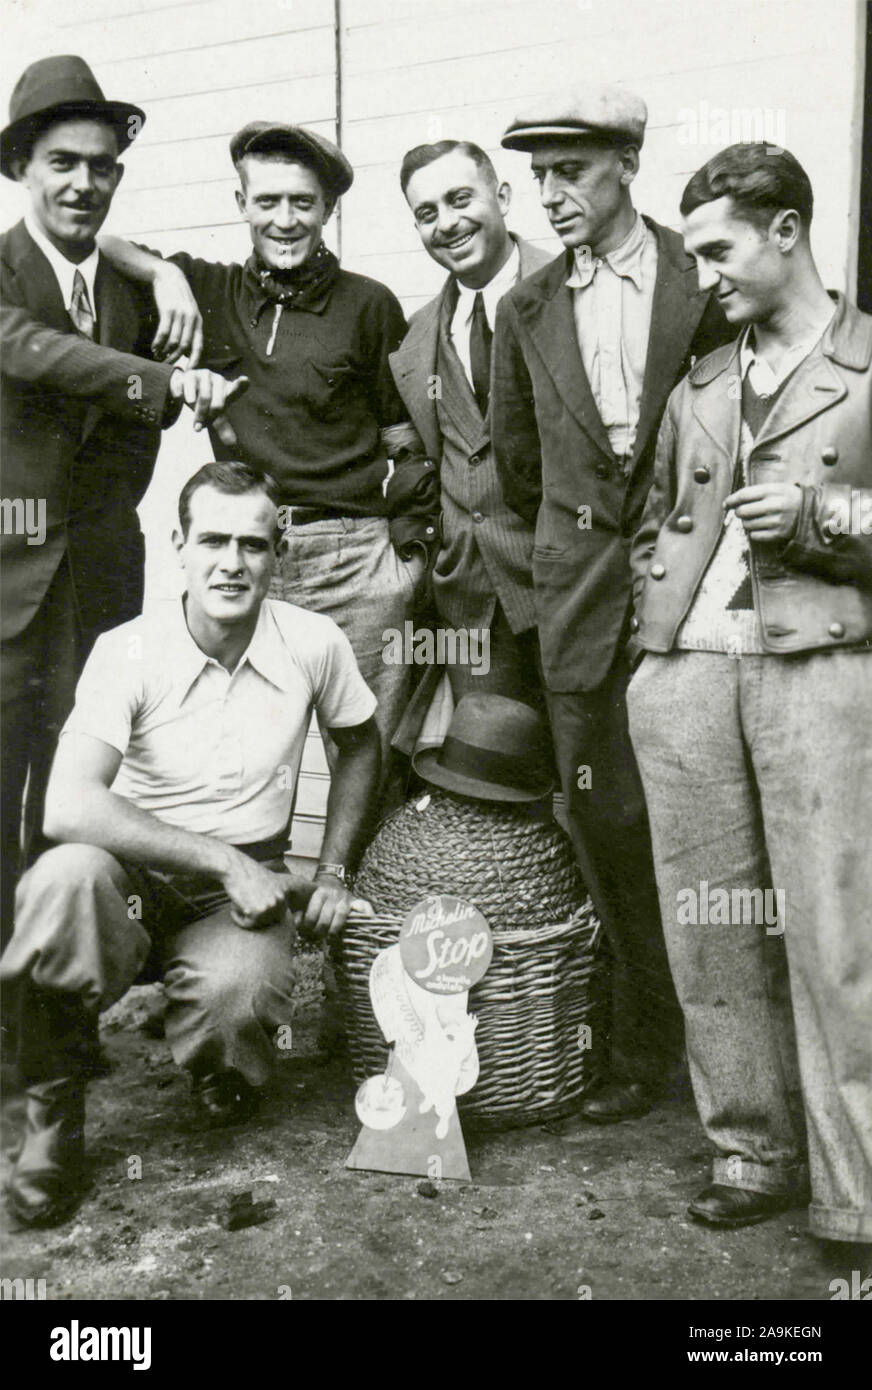 Group of men next to a demijohn of wine Stock Photo